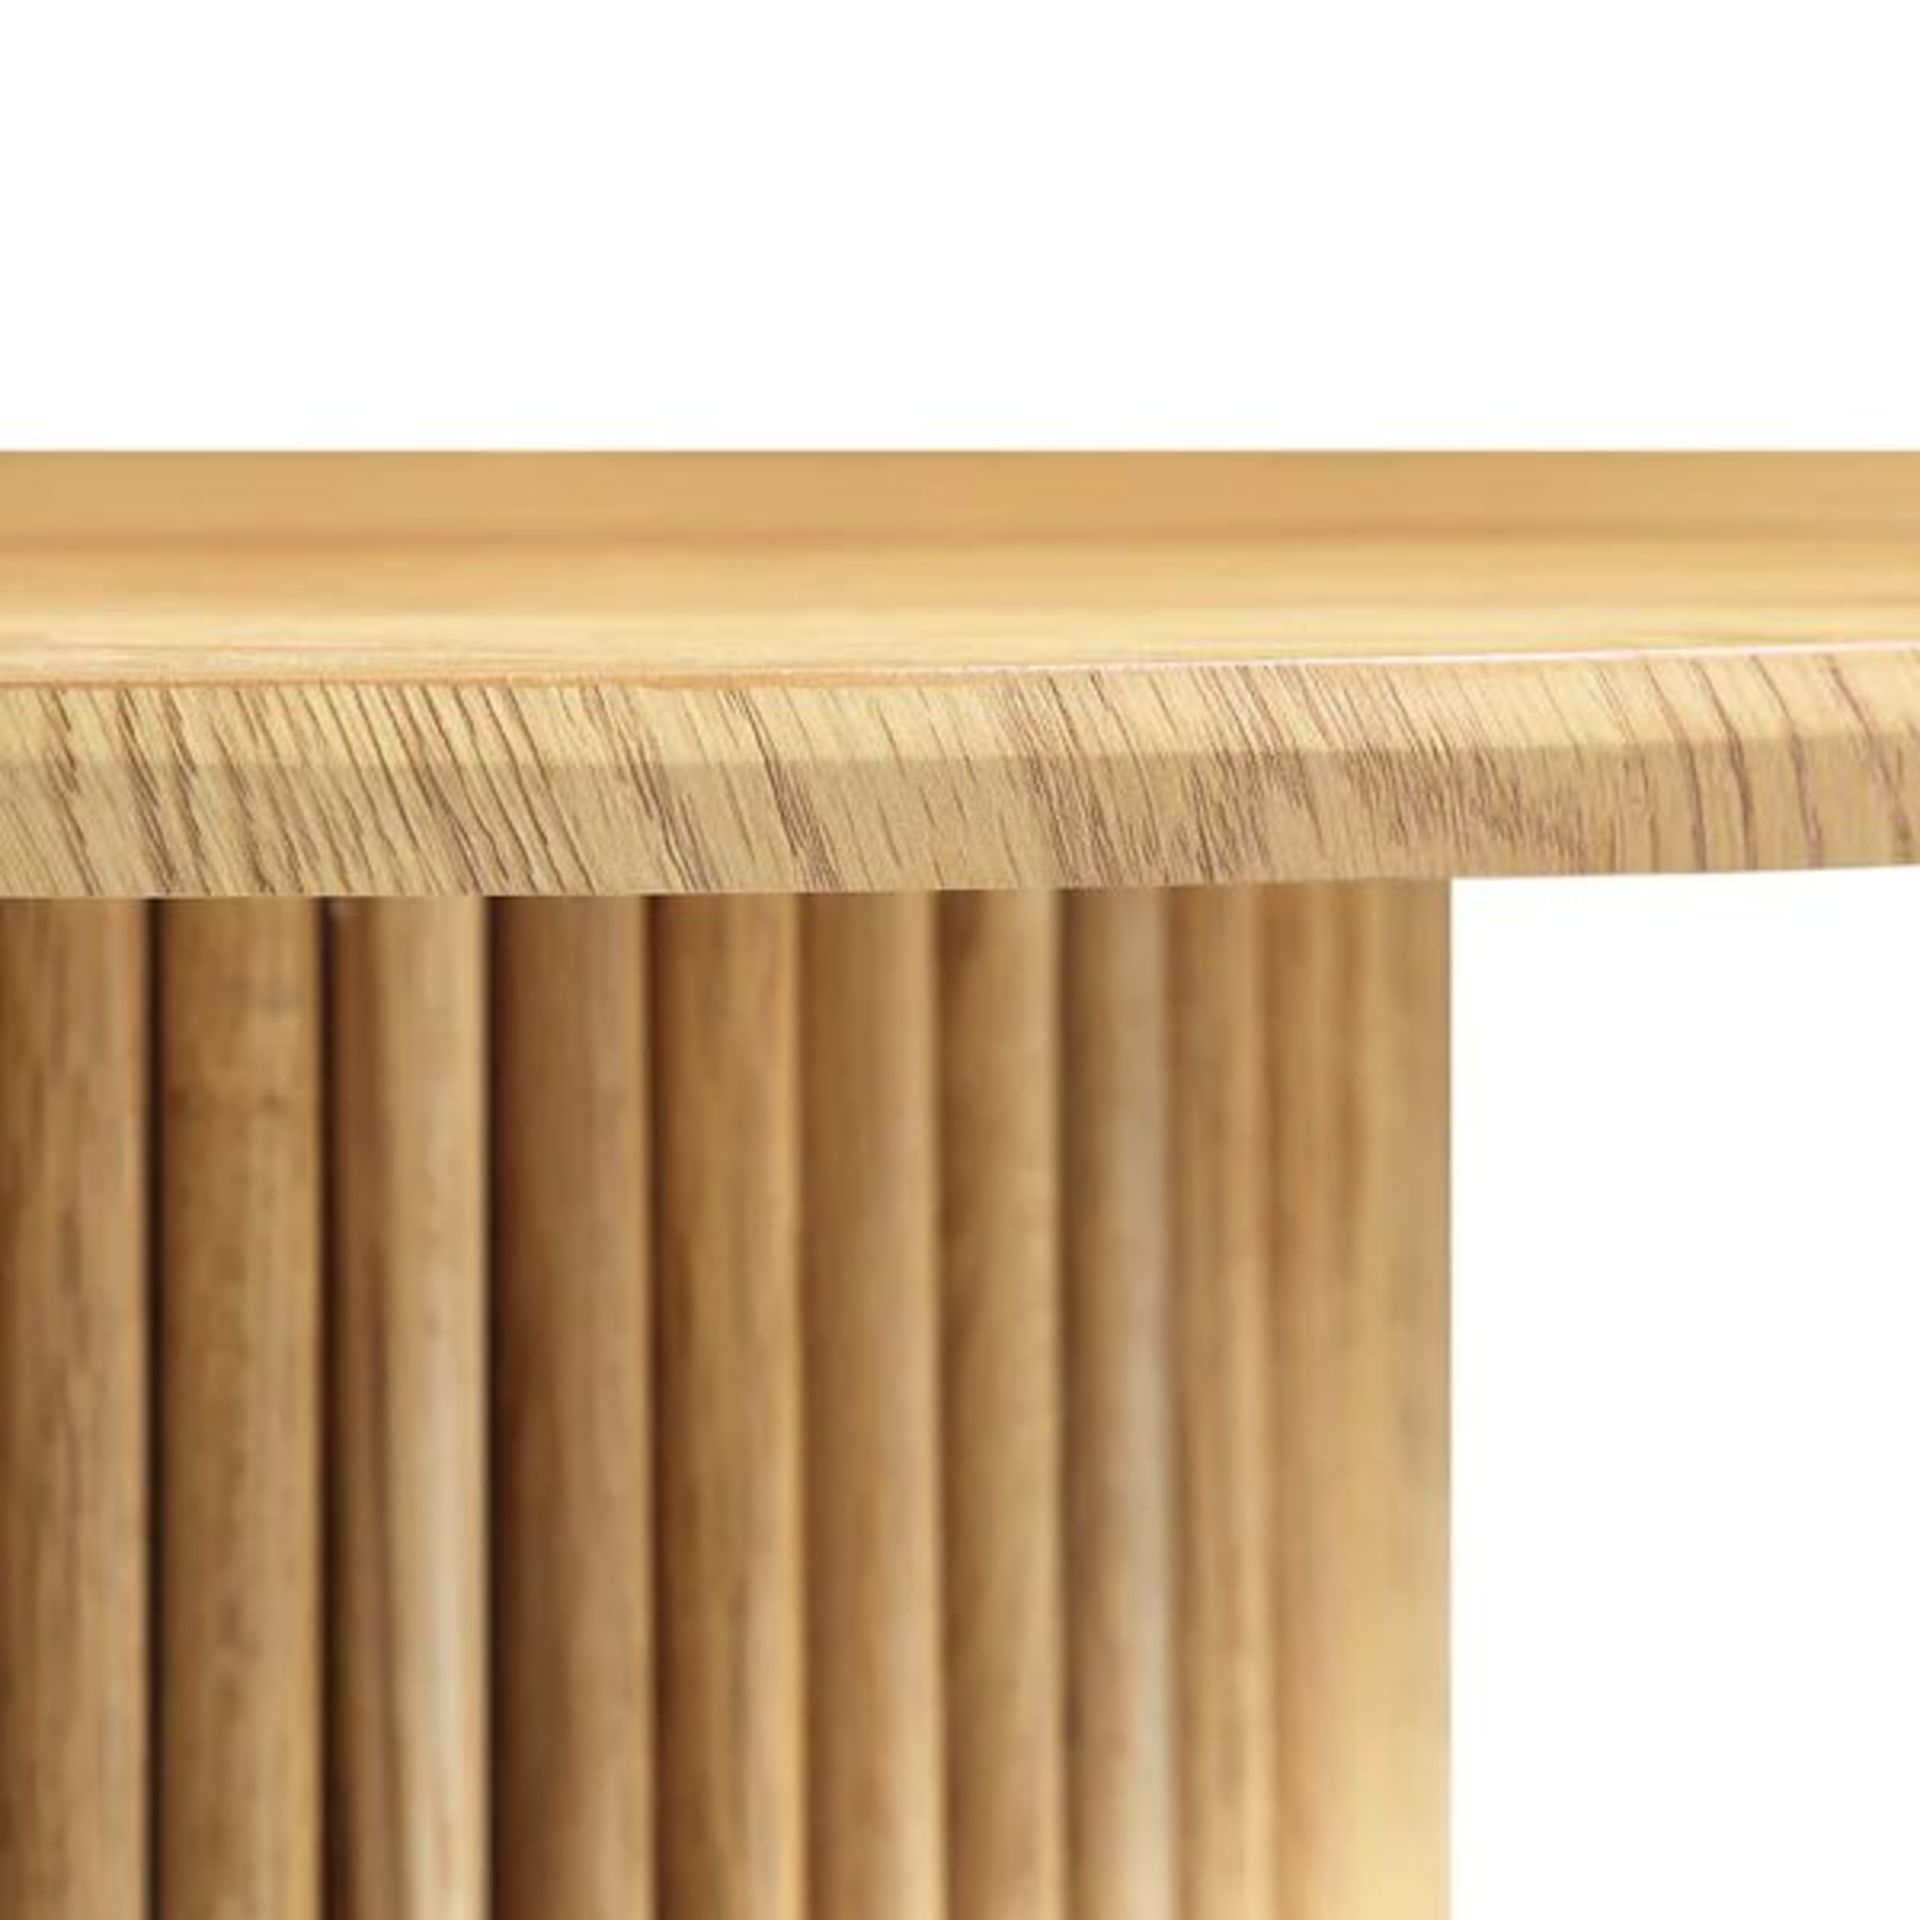 Maru Round Oak Pedestal Coffee Table, Oak. - SR3. RRP £259.99. Meet the new addition to our Maru - Image 2 of 2